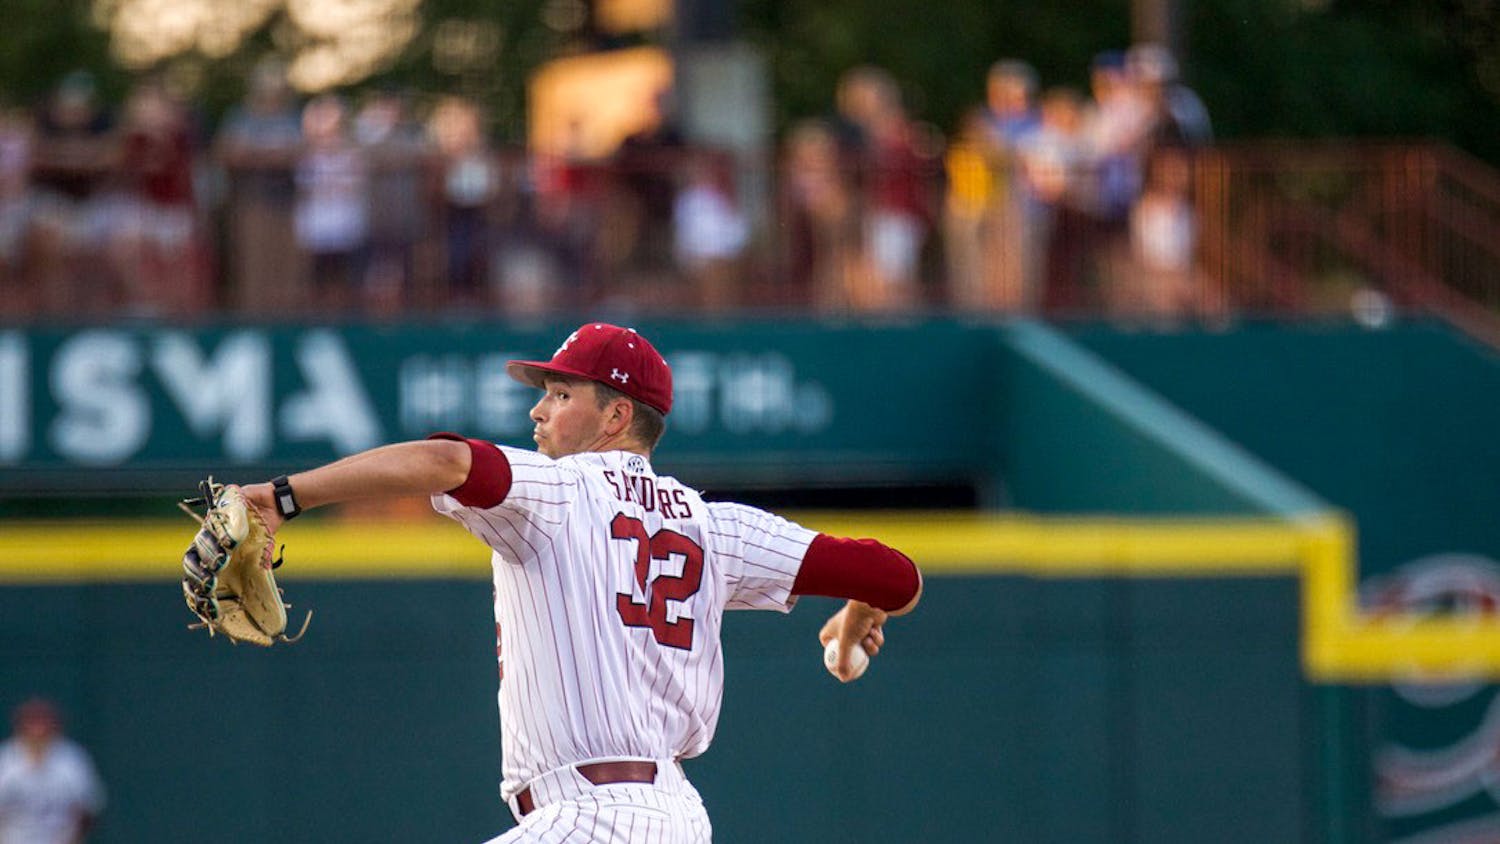 South Carolina baseball swept its three-game series against Florida on April 20-22. The Gamecocks run-ruled the Gators 13-3 in seven innings on Thursday and continued to balance offensive firepower with effective pitching, beating the Gators 5-2 on Friday and finishing out the series 7-5 on Saturday.